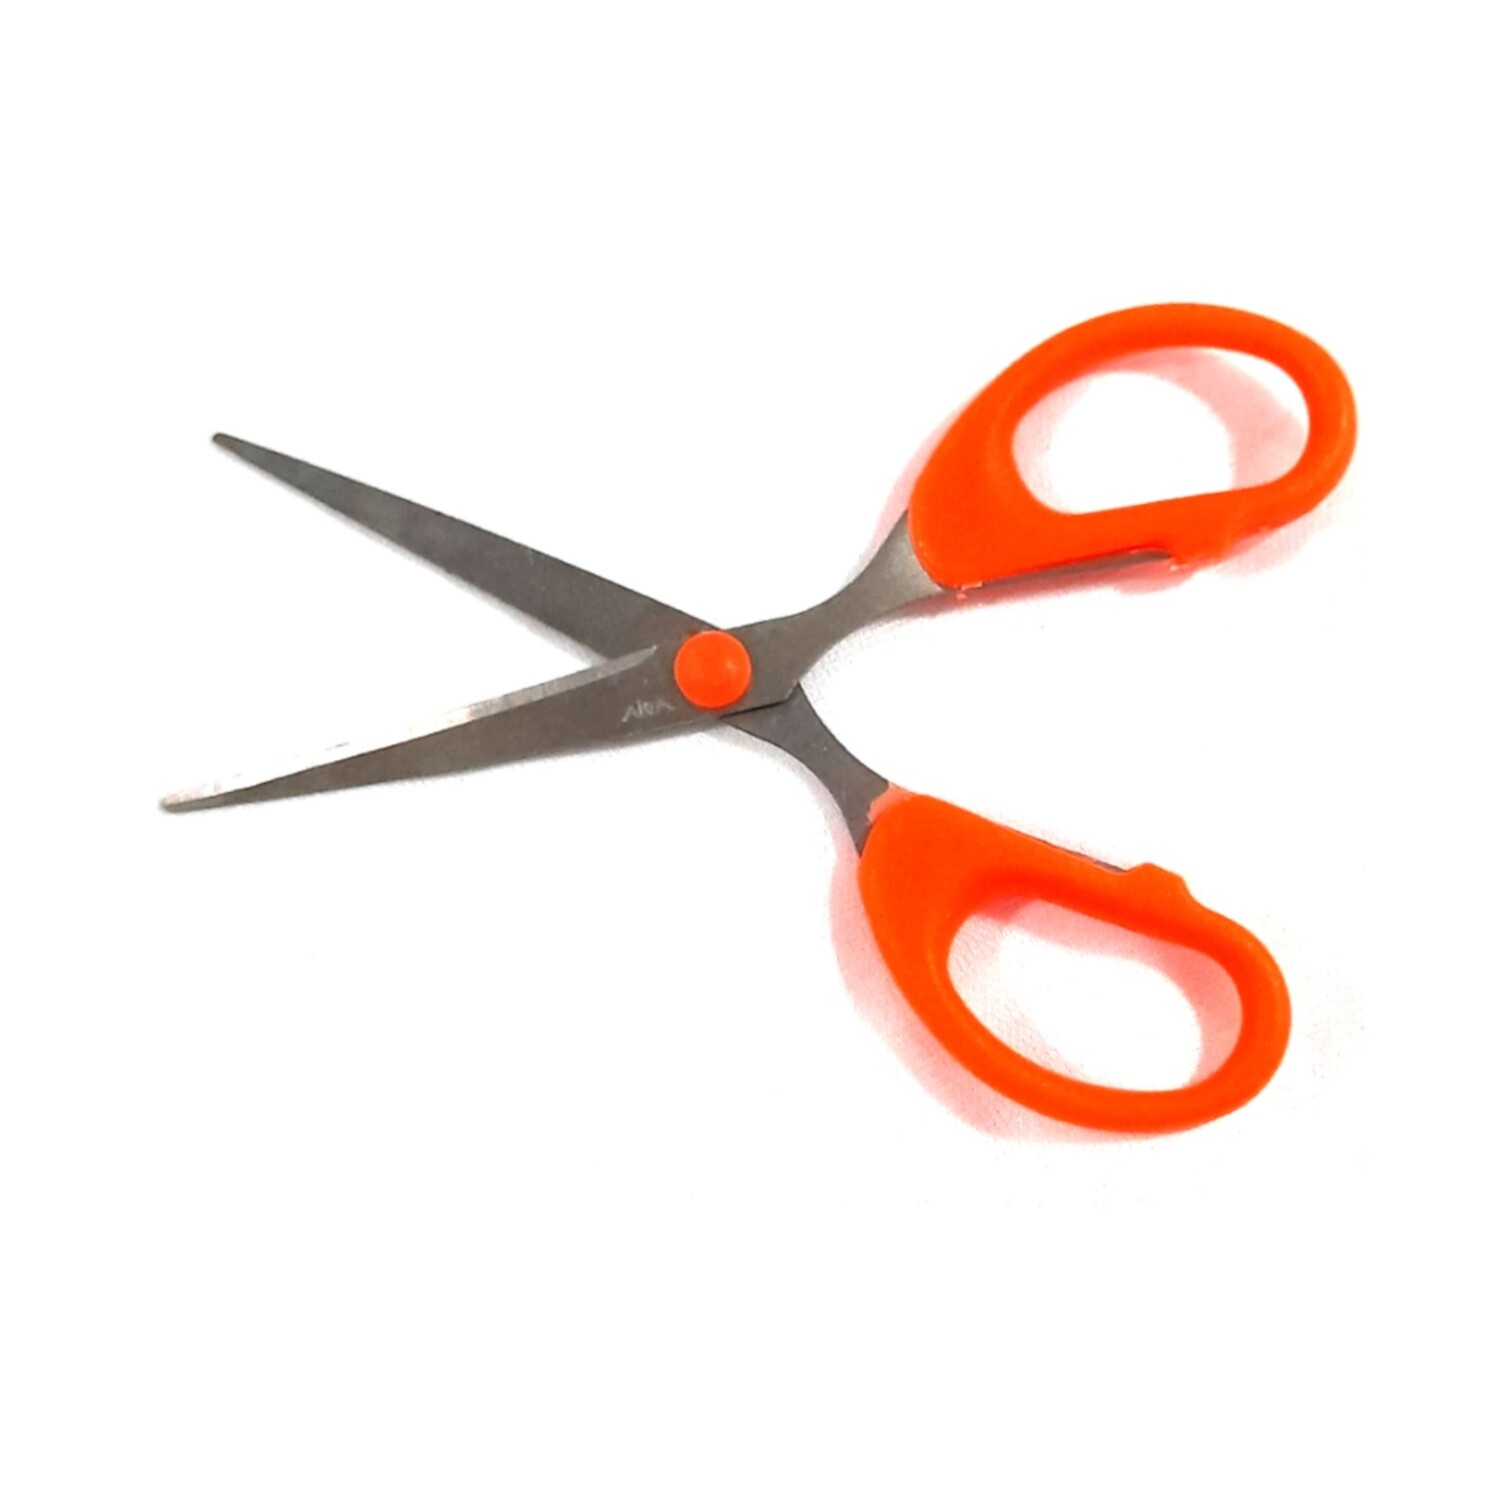 Easy Grip Scissor For General Cutting and All Purpose Multicolour - Set of 2 Pieces